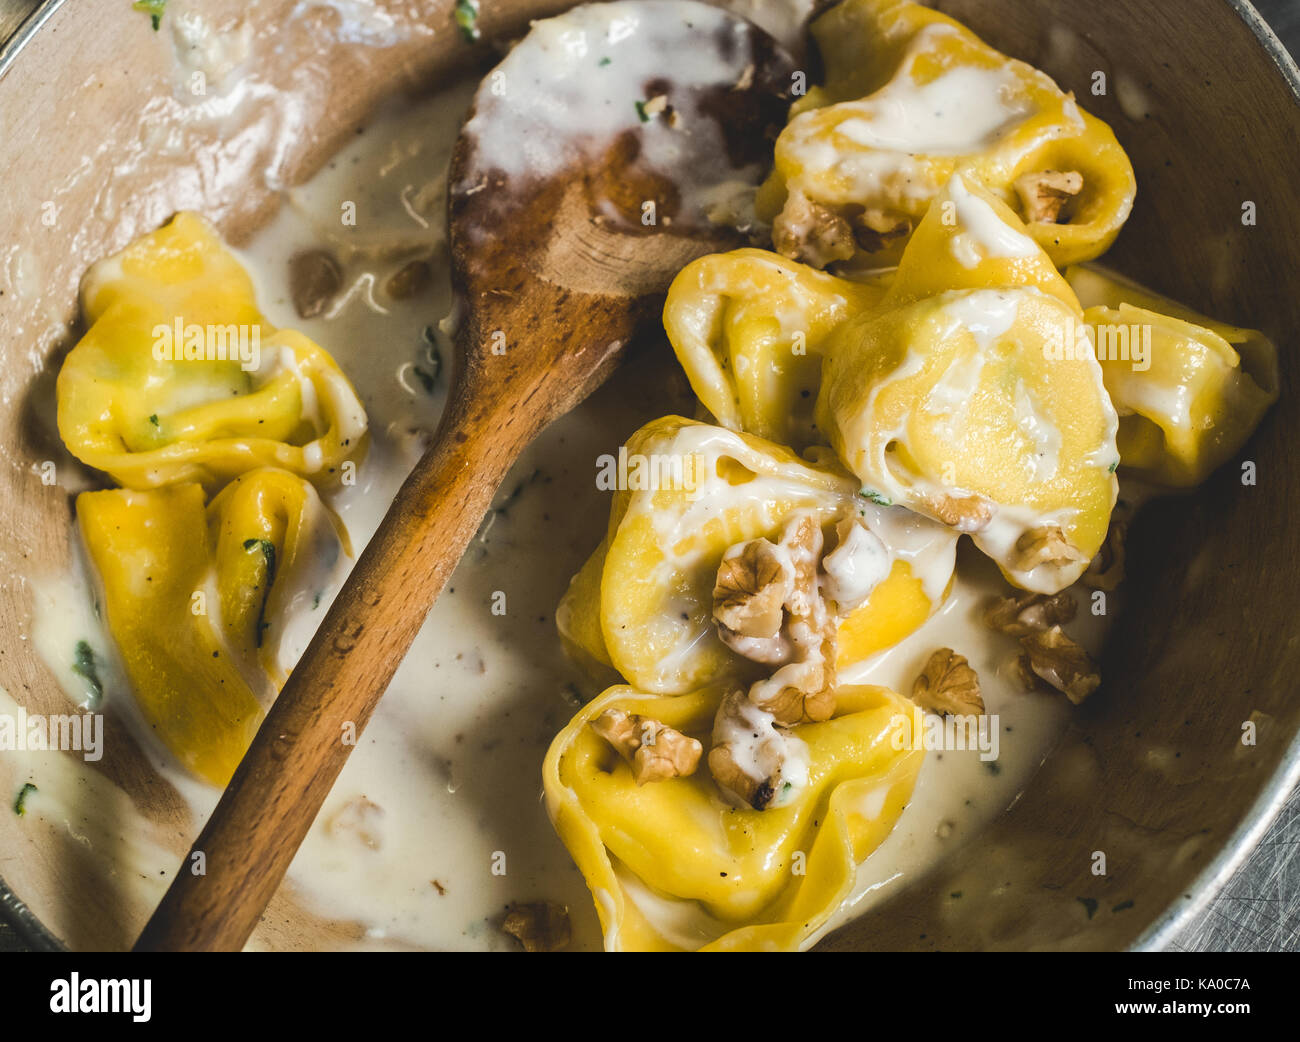 Tortelloni (typical Bologna homemade stuffed pasta) with nuts, cream and sage in their cooking pan Stock Photo